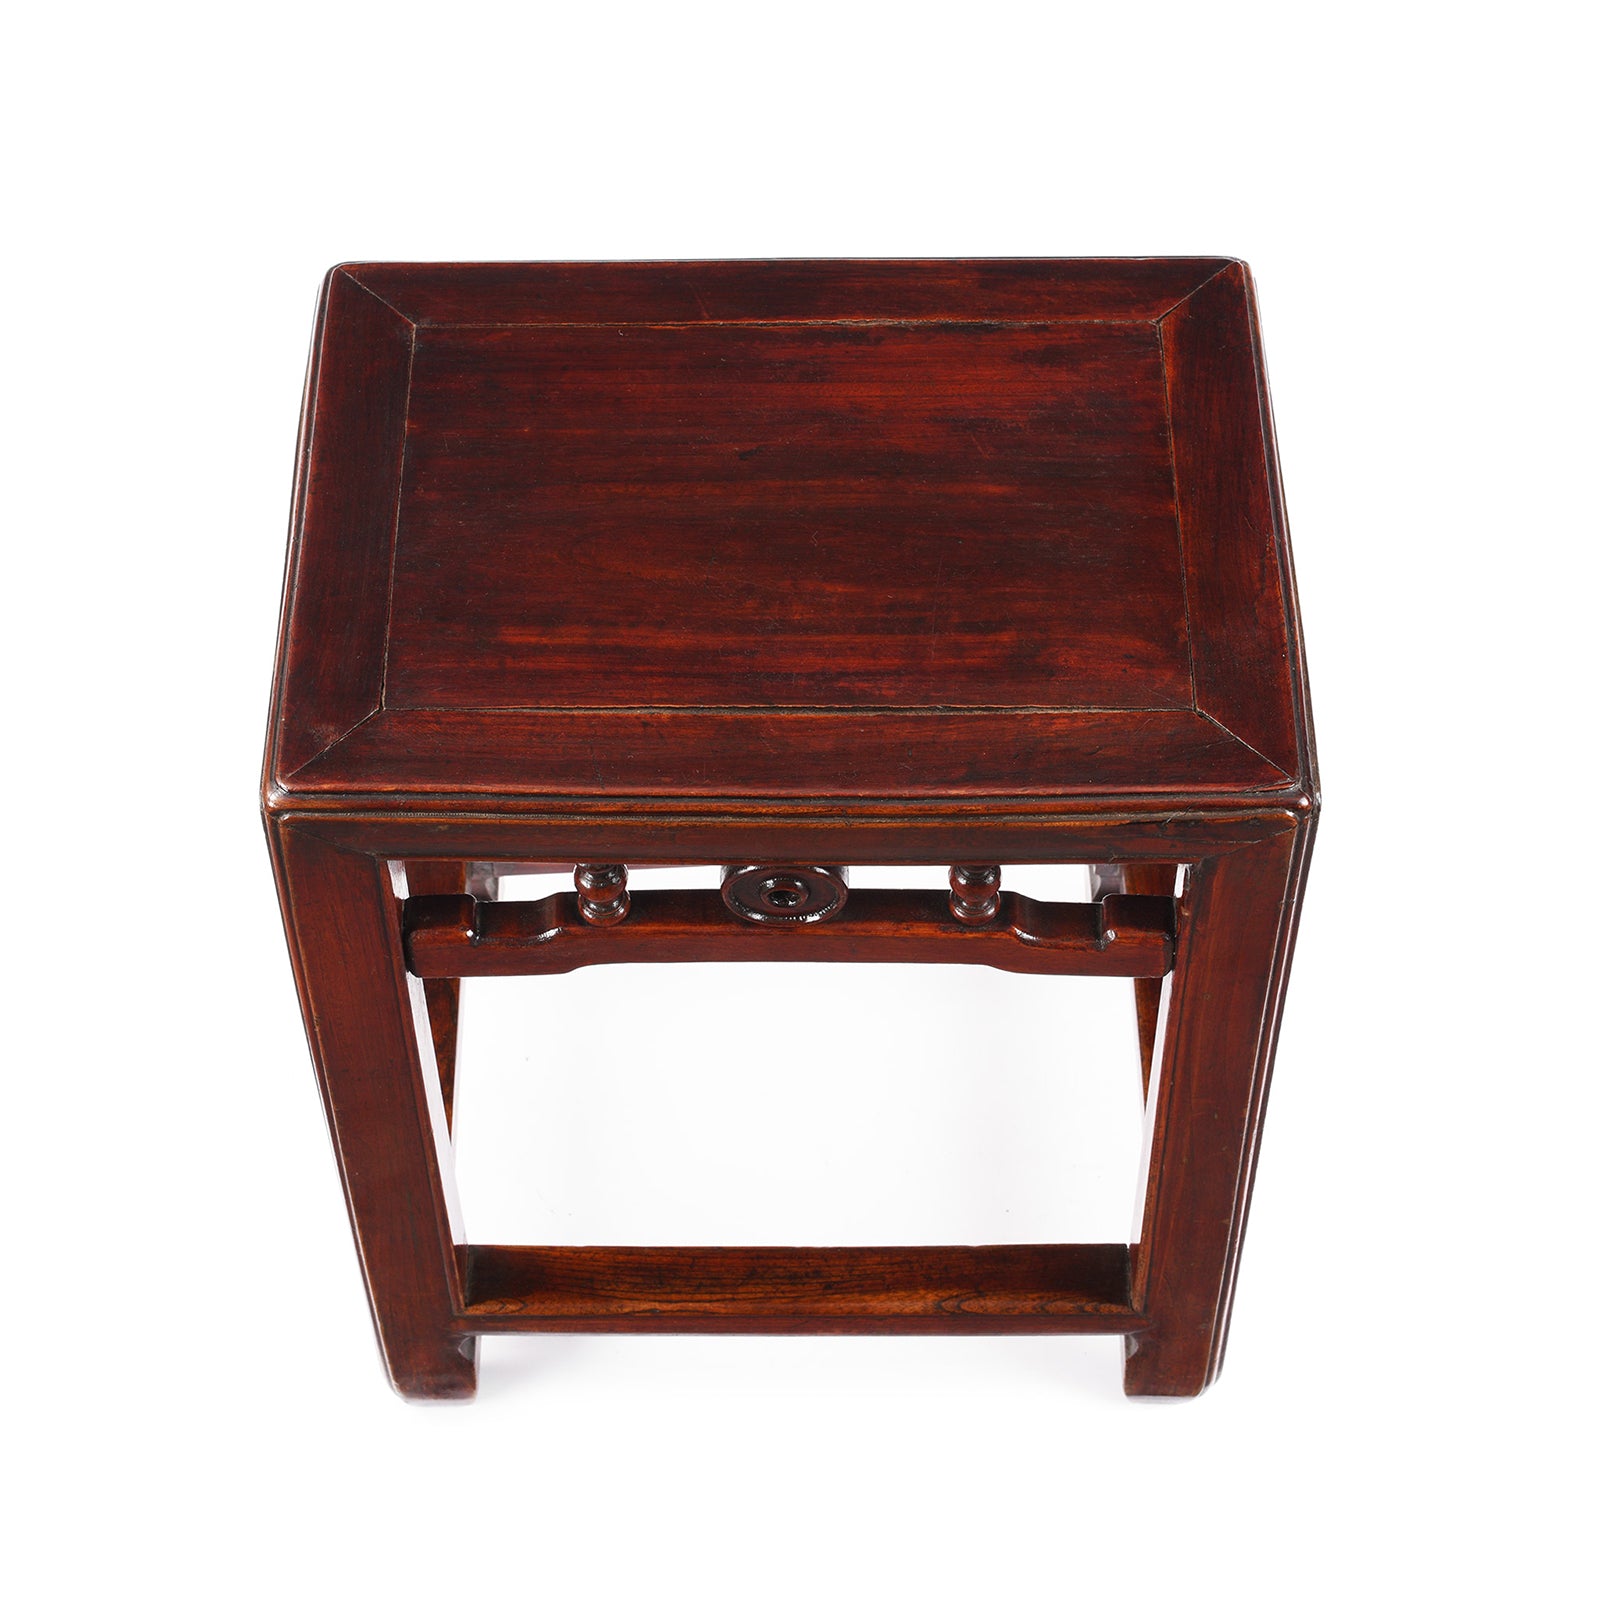 Antique Chinese Side Table From Jiangsu | Indigo Antiques